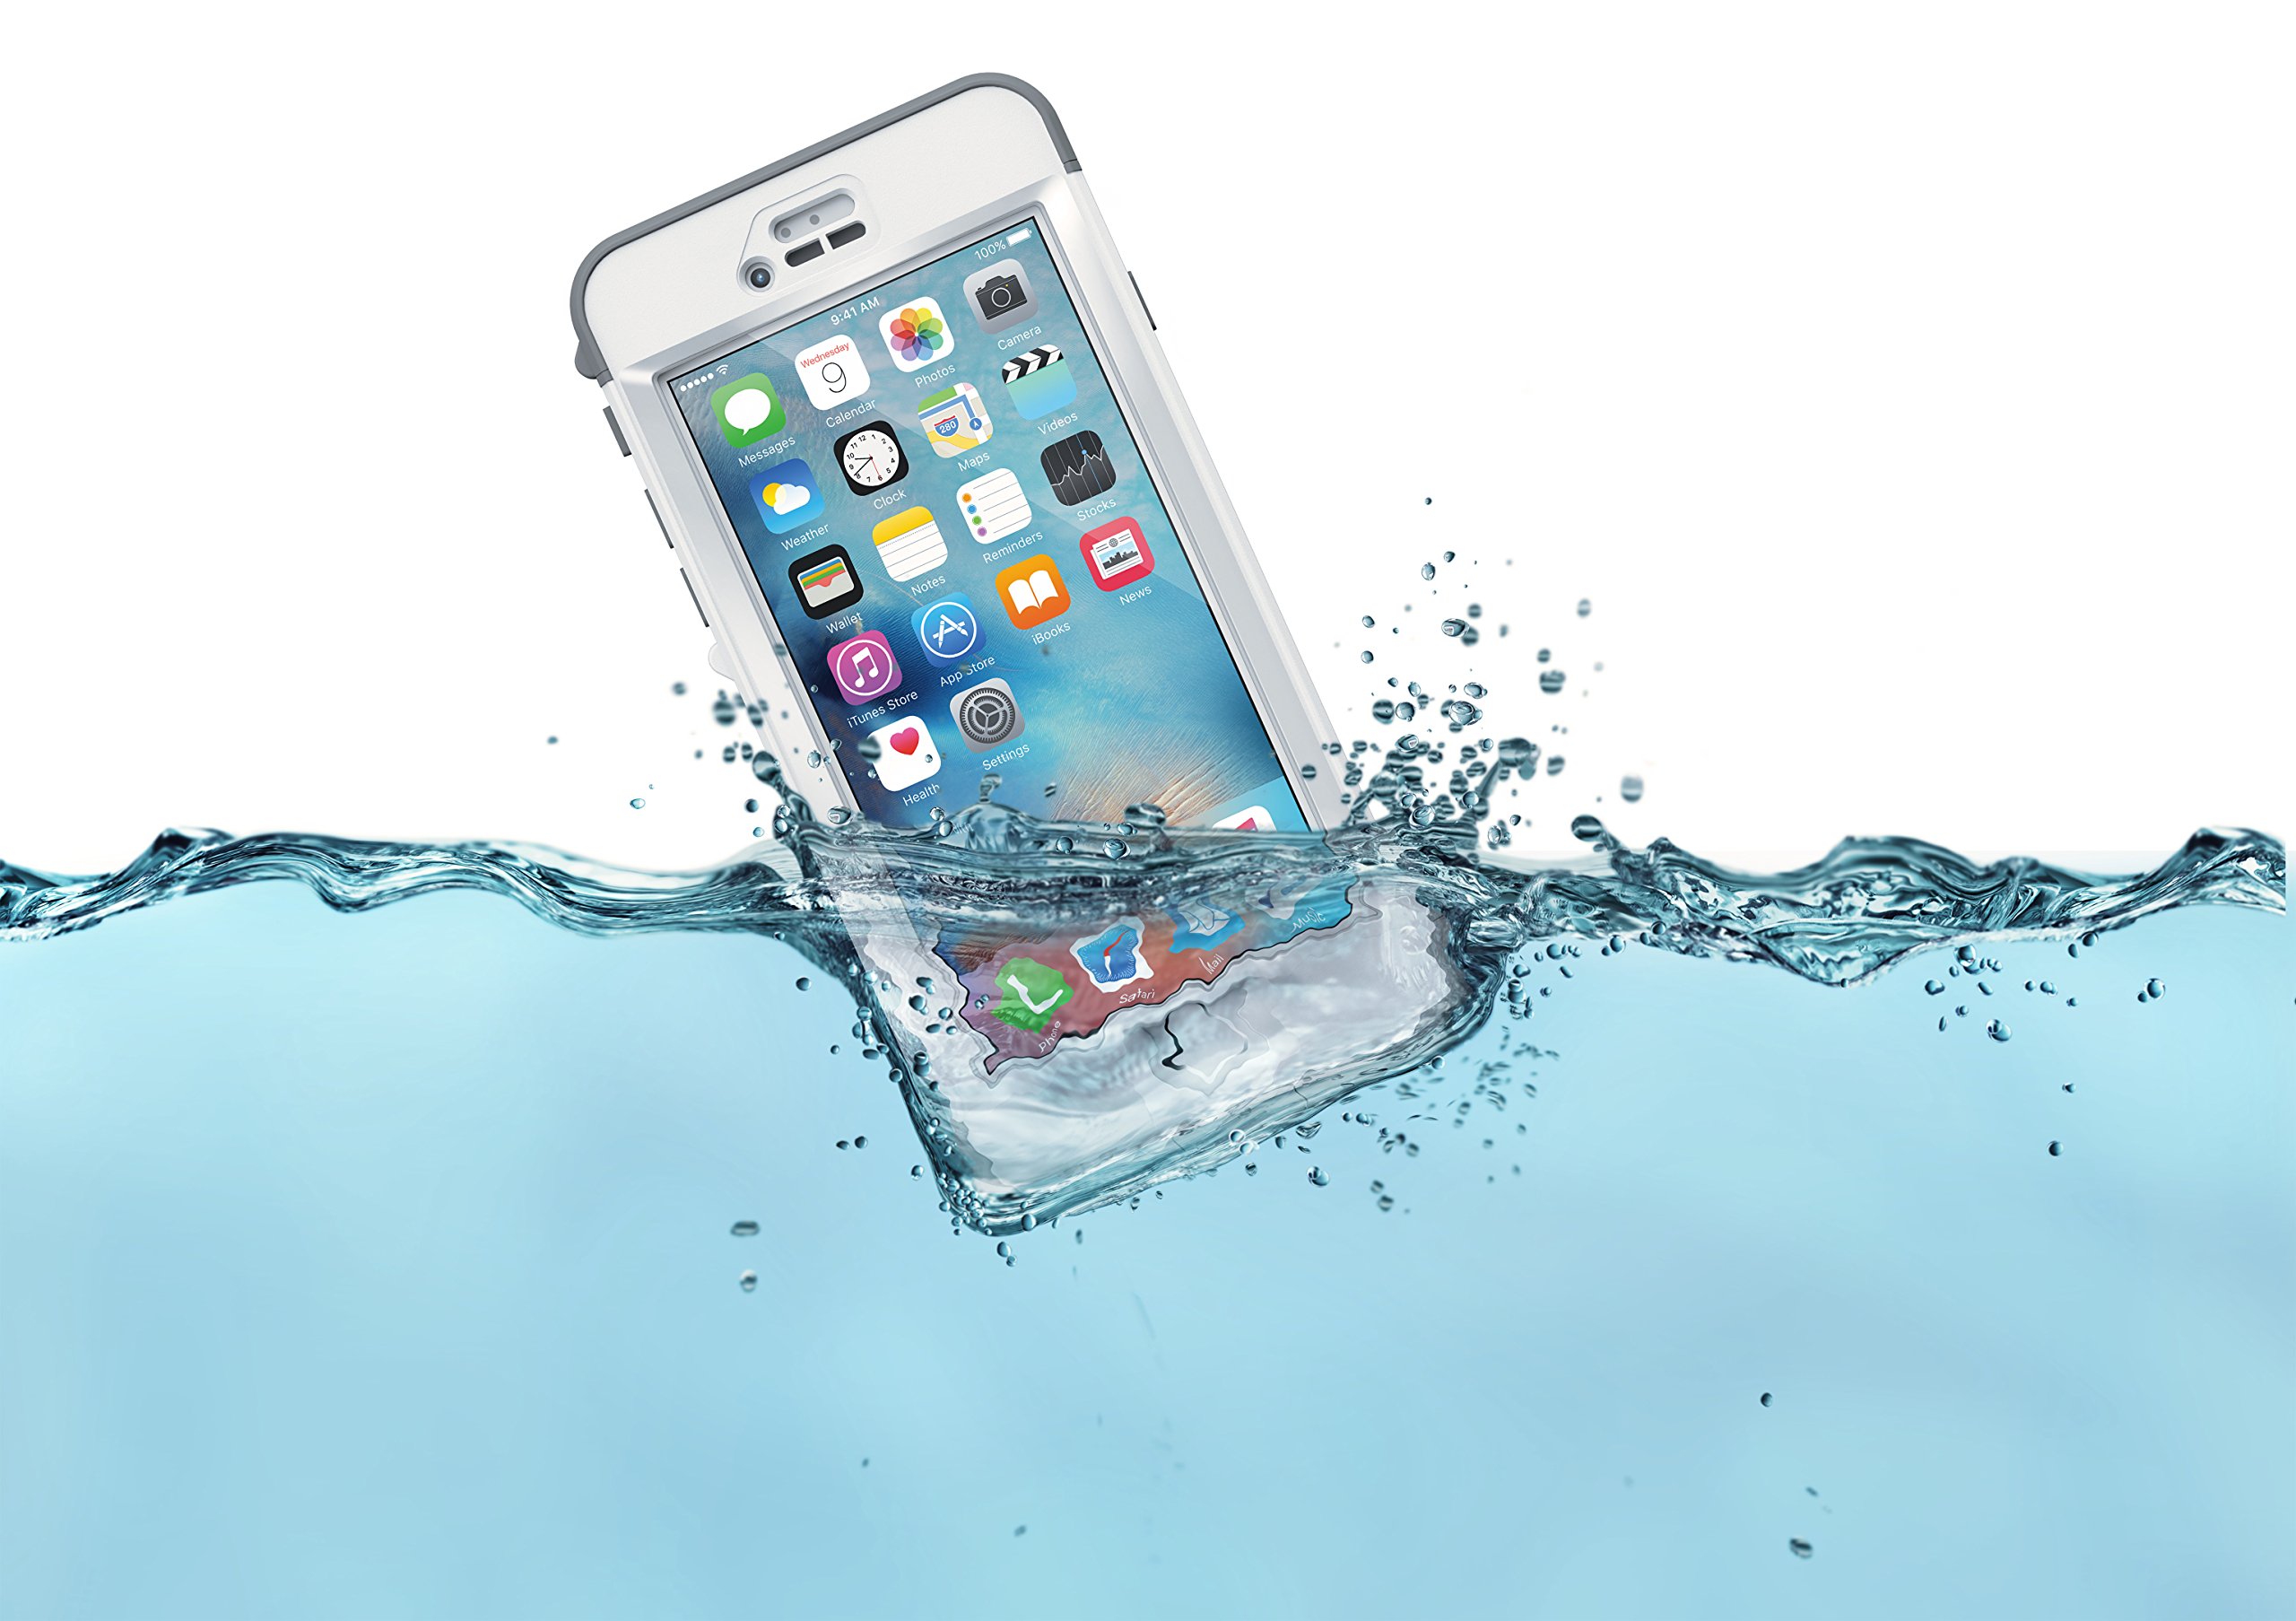 Lifeproof NÜÜD SERIES iPhone 6s ONLY Waterproof Case - Retail Packaging - AVALANCE (BRIGHT WHITE/COOL GREY)